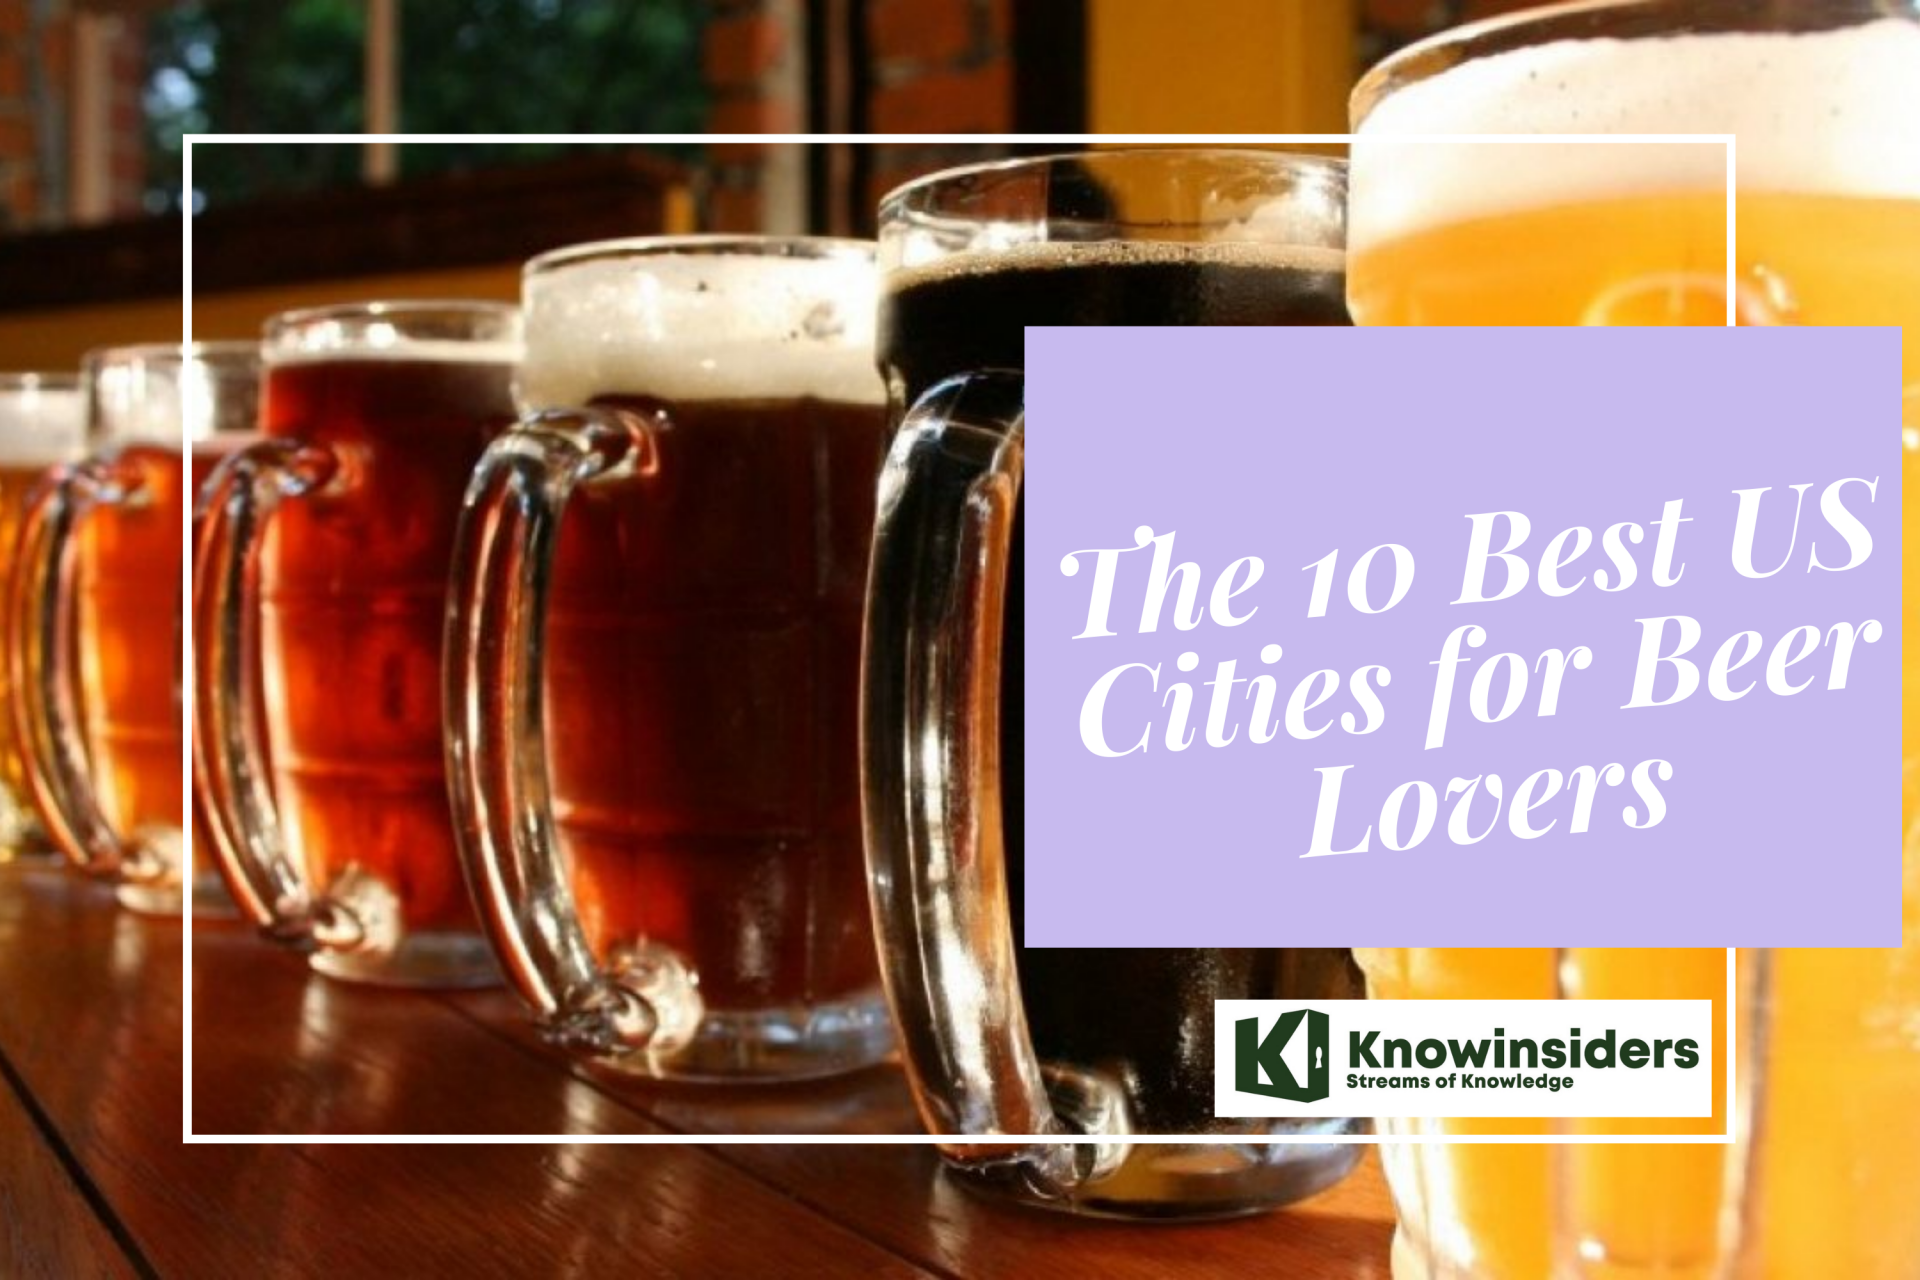 The 10 Best US Cities for Beer Lovers